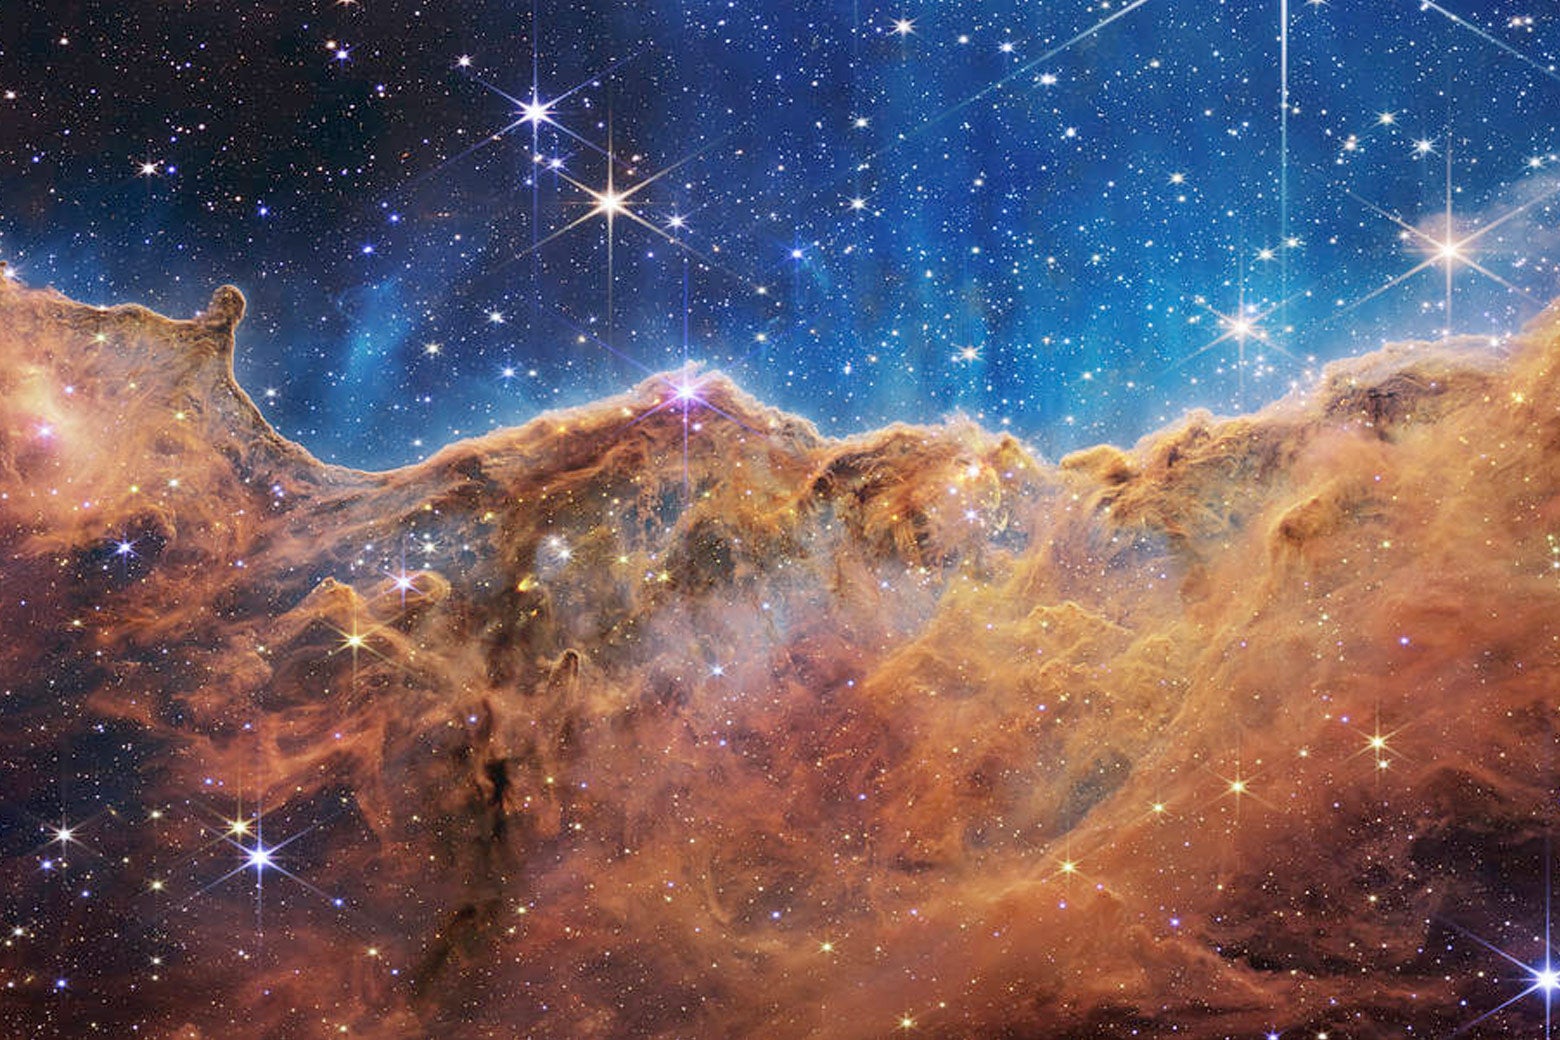 A blue sky in outer space speckled with stars. Giant plumes of orange-red gas cover half the frame. They look like fluffy, bejeweled mountains. The image evokes the word "majestic."